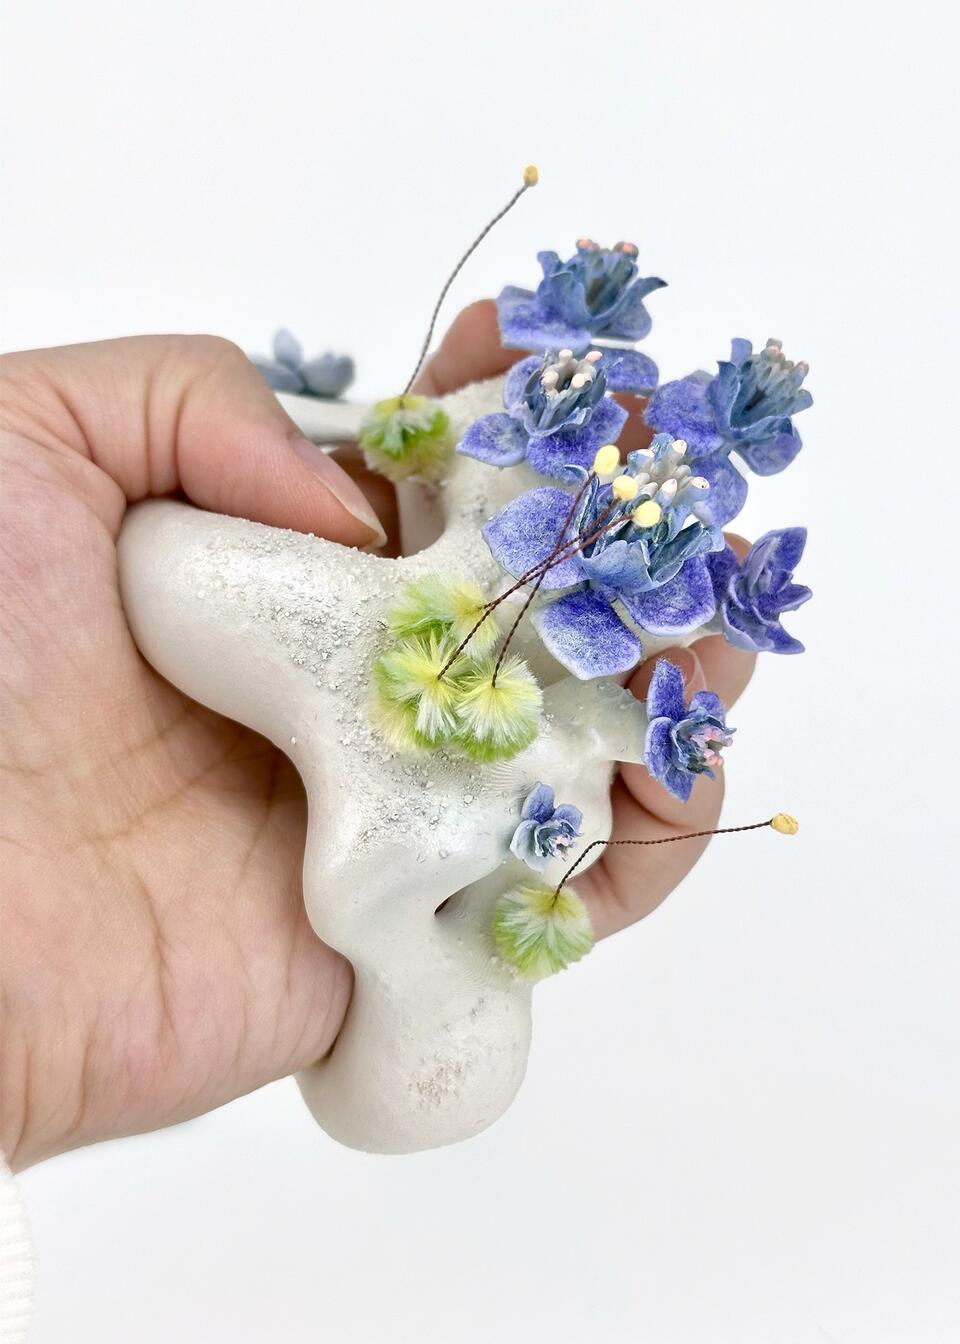 Handheld biotech for nature therapy.